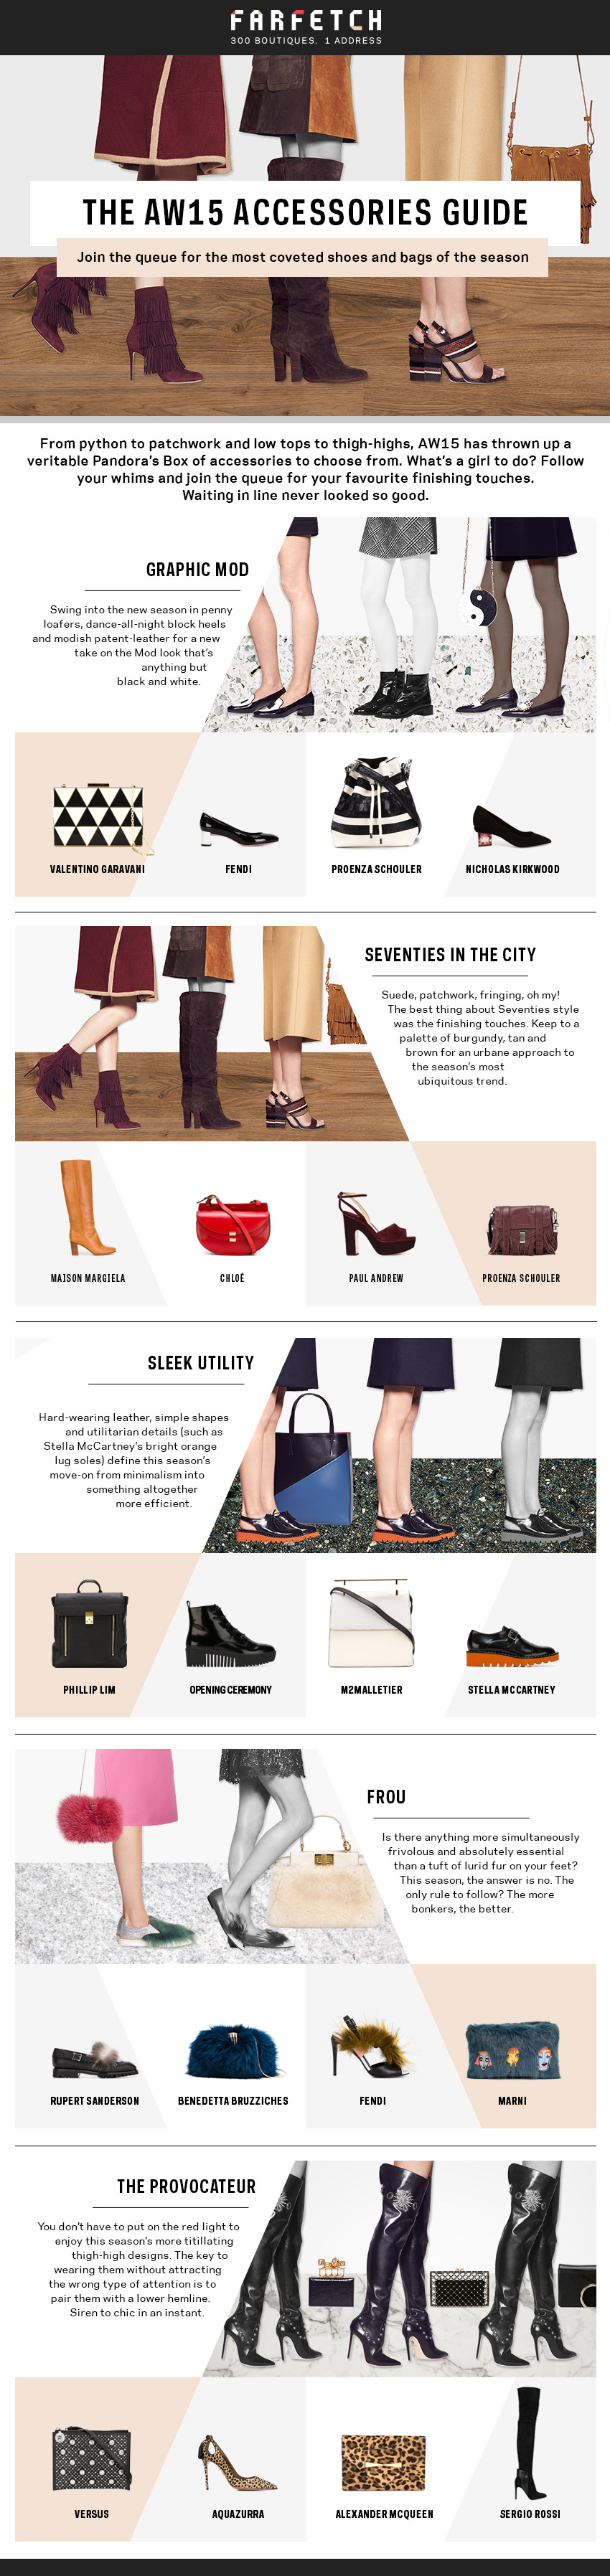 The AW15 Accessories Guide-2